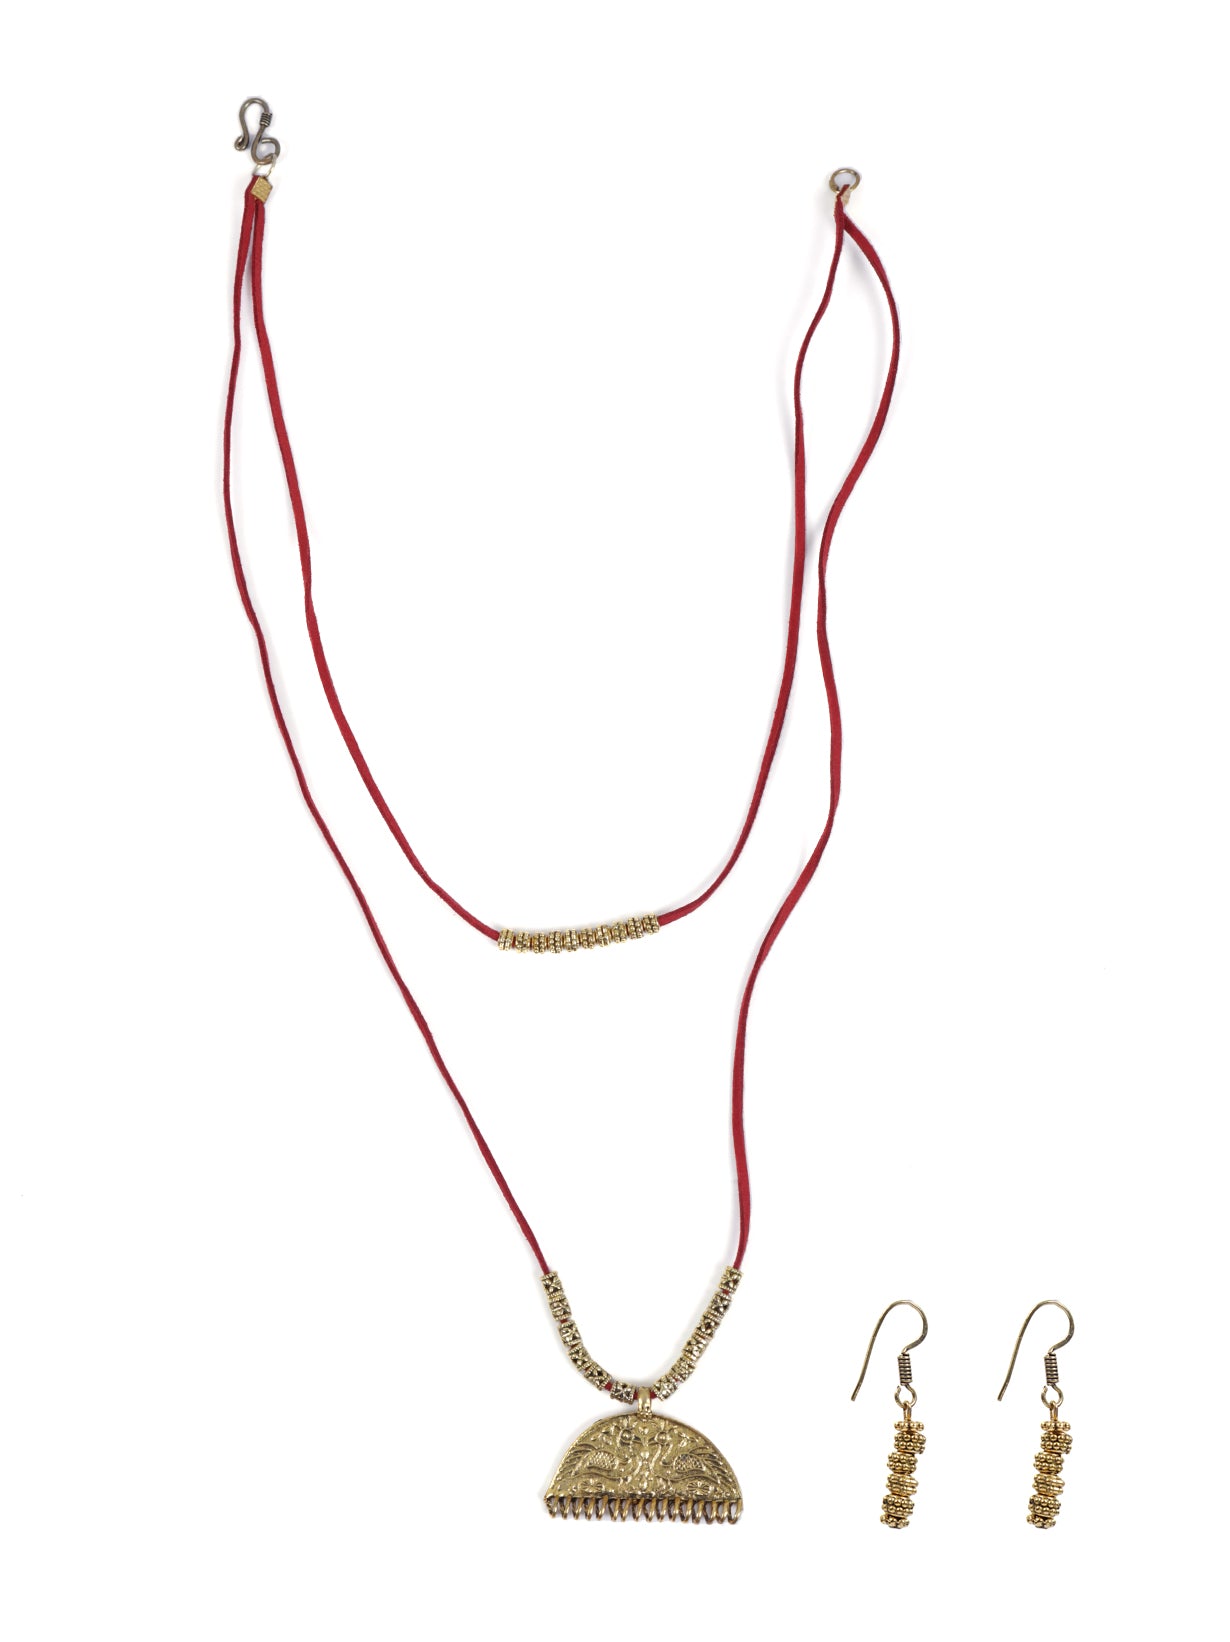 Minimal 2 Layer Necklace Set with Antique Gold Finish Metal Pendant